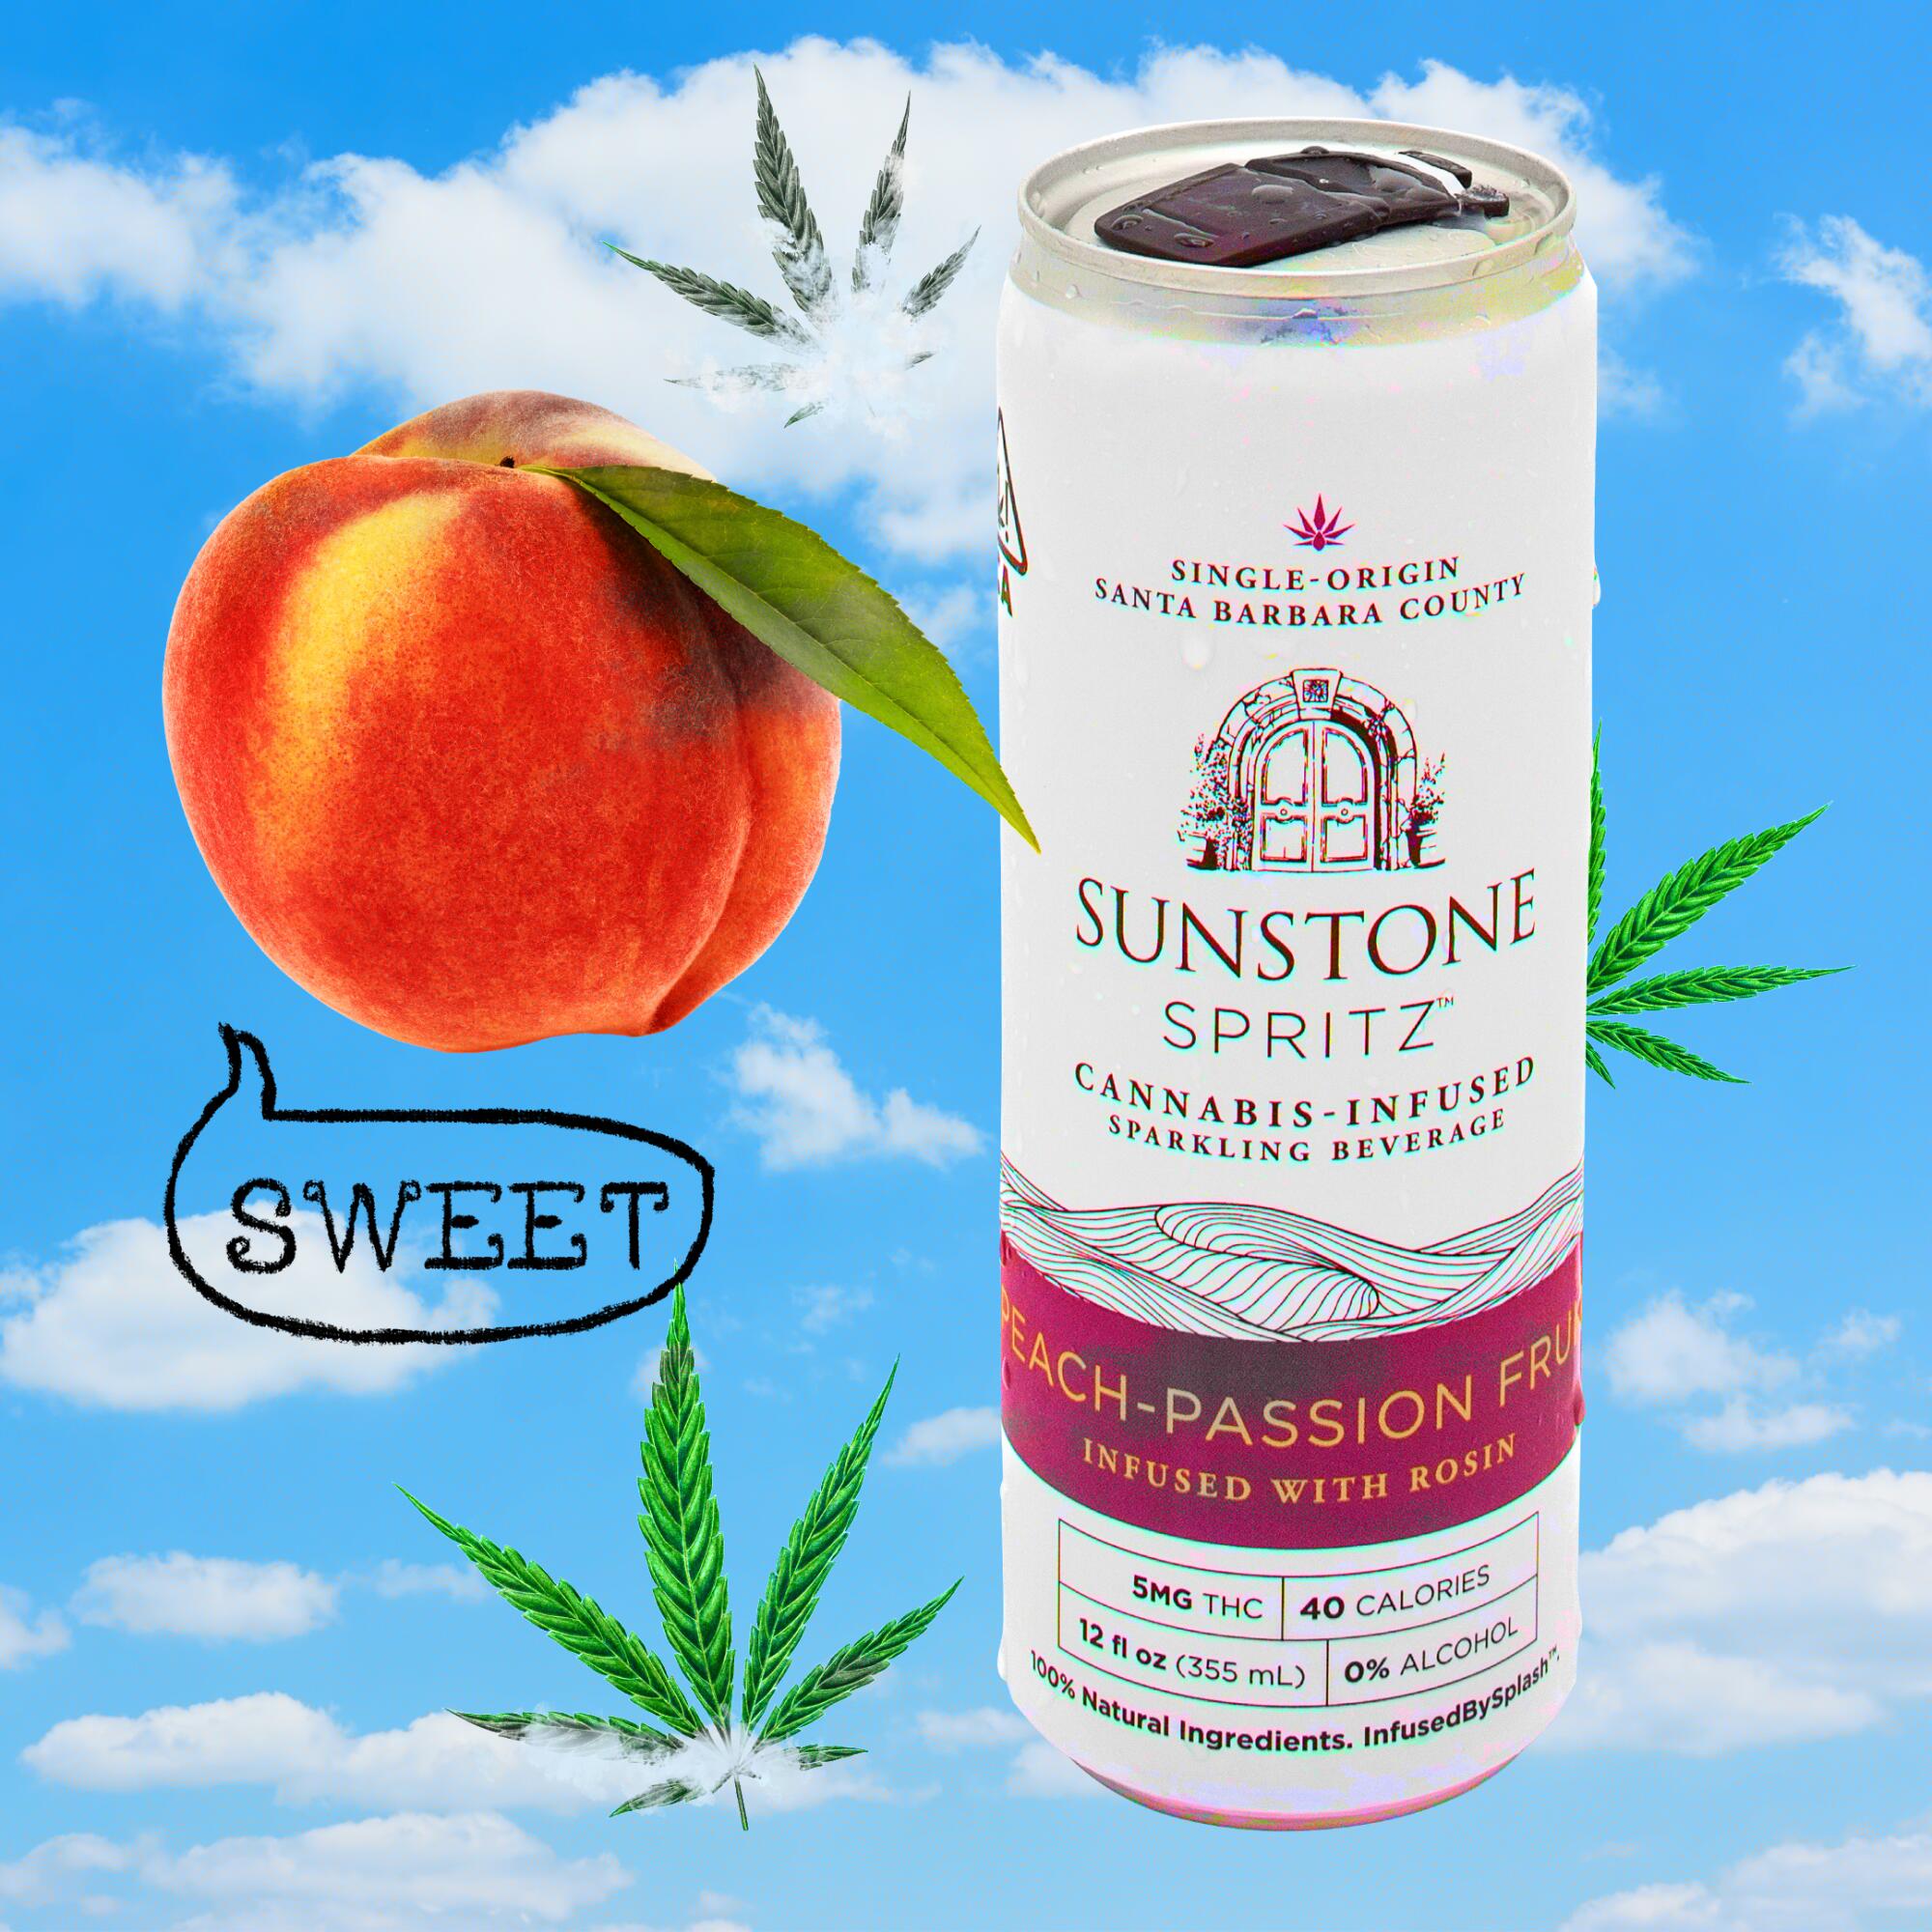 Sunstone Spritz Peach-passion fruit drink next to an illustration of a peach and the word "sweet."